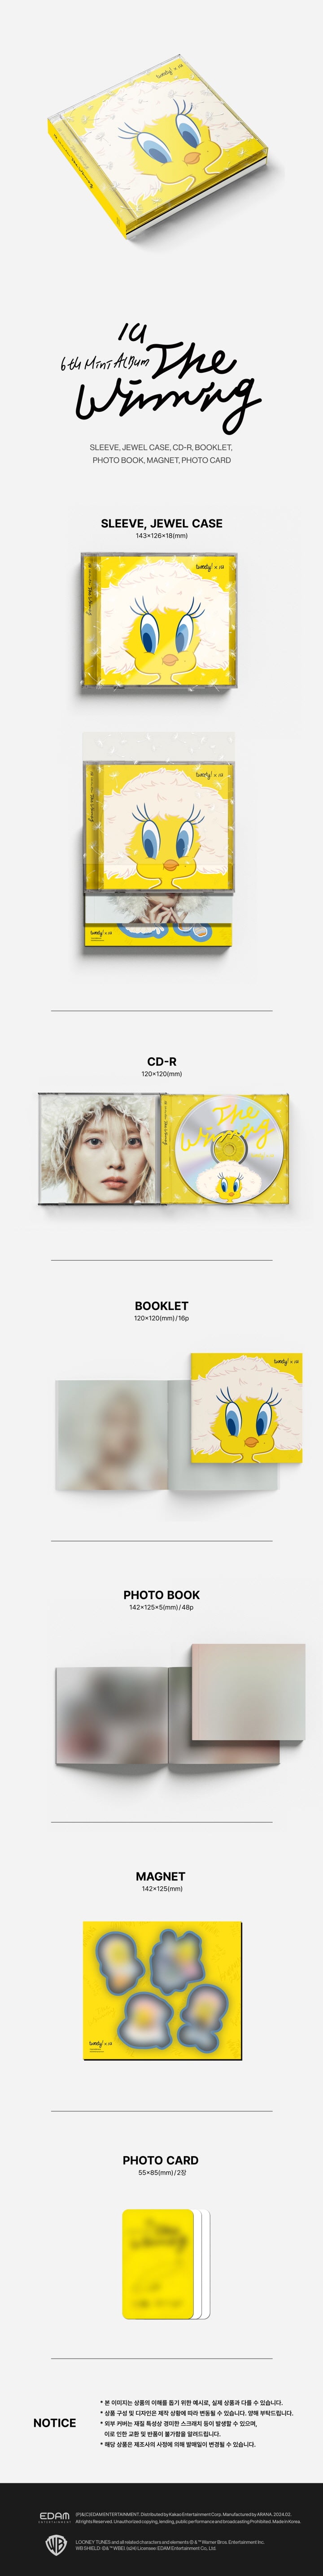 'Tweety - SLEEVE 143*126*18(mm) -JEWEL CASE 143*126(mm) - CD-R (DISC1) 120*120(mm) - BOOKLET 120*120(mm) / 16p - PHOTO BOO...